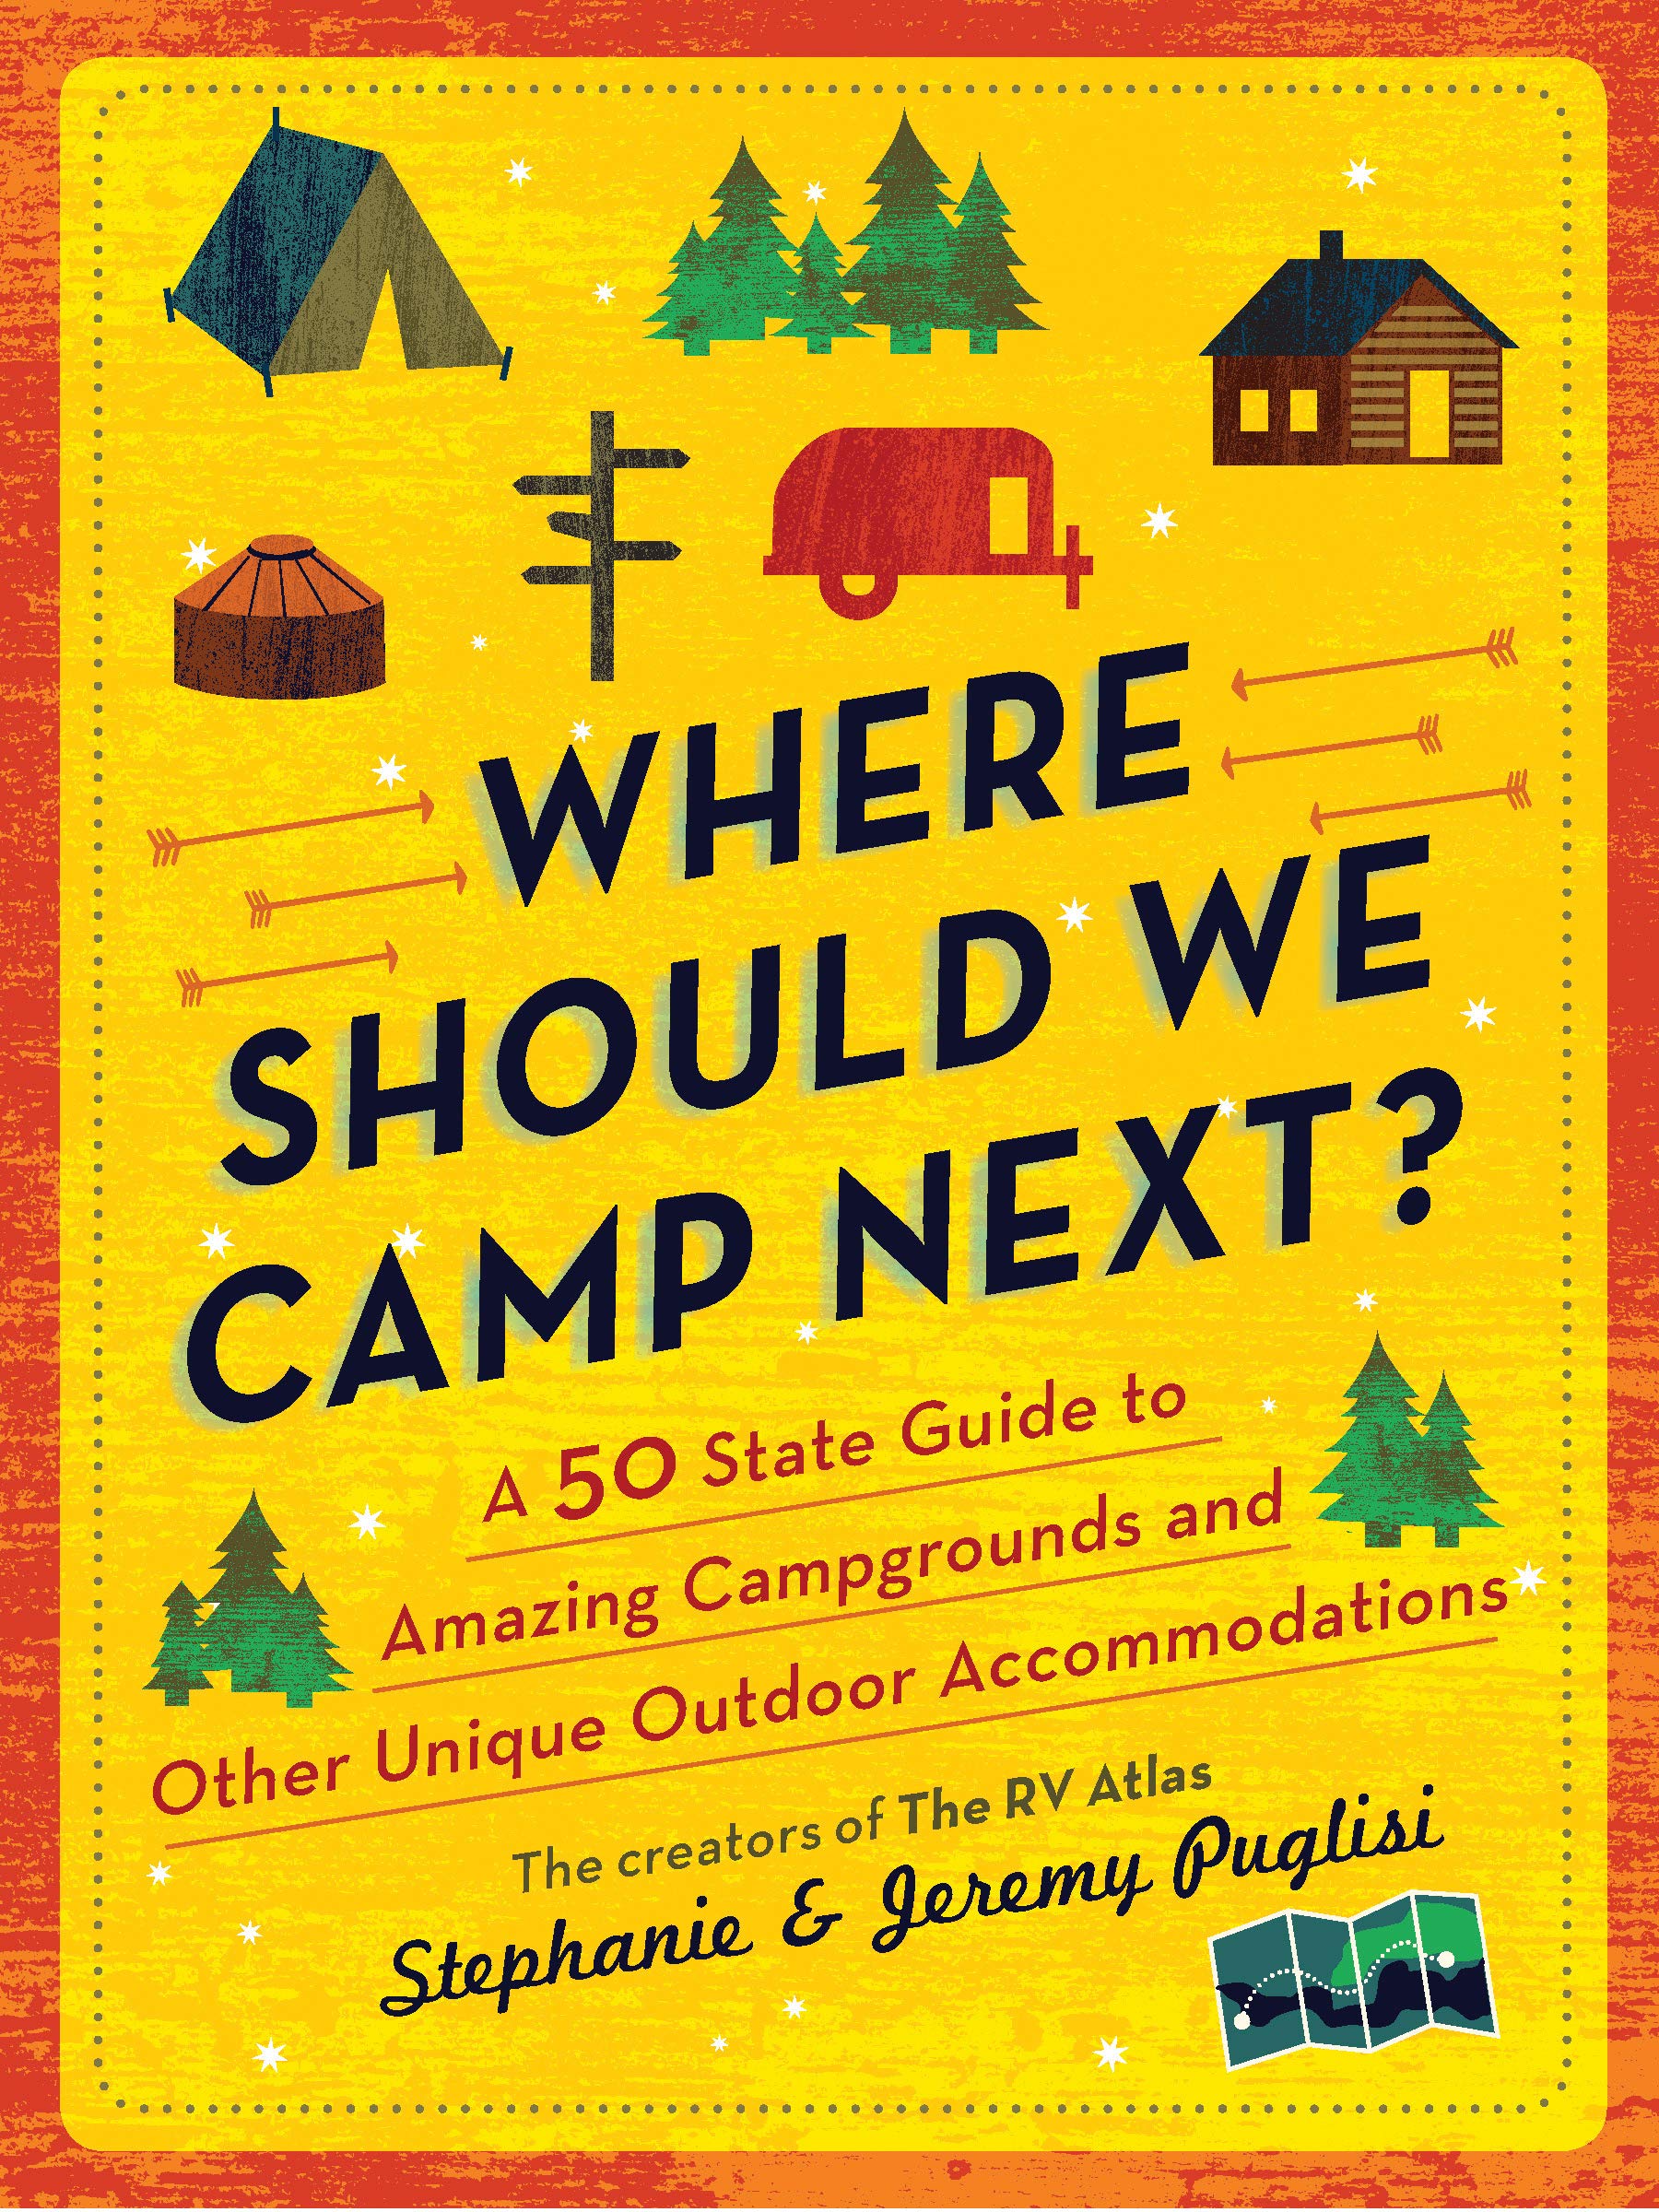 Where Should We Camp Next?: A 50-State Guide to Amazing Campgrounds and Other Unique Outdoor Accommodations (Plan a Family-Friendly Budget-Conscious Summer Trip)